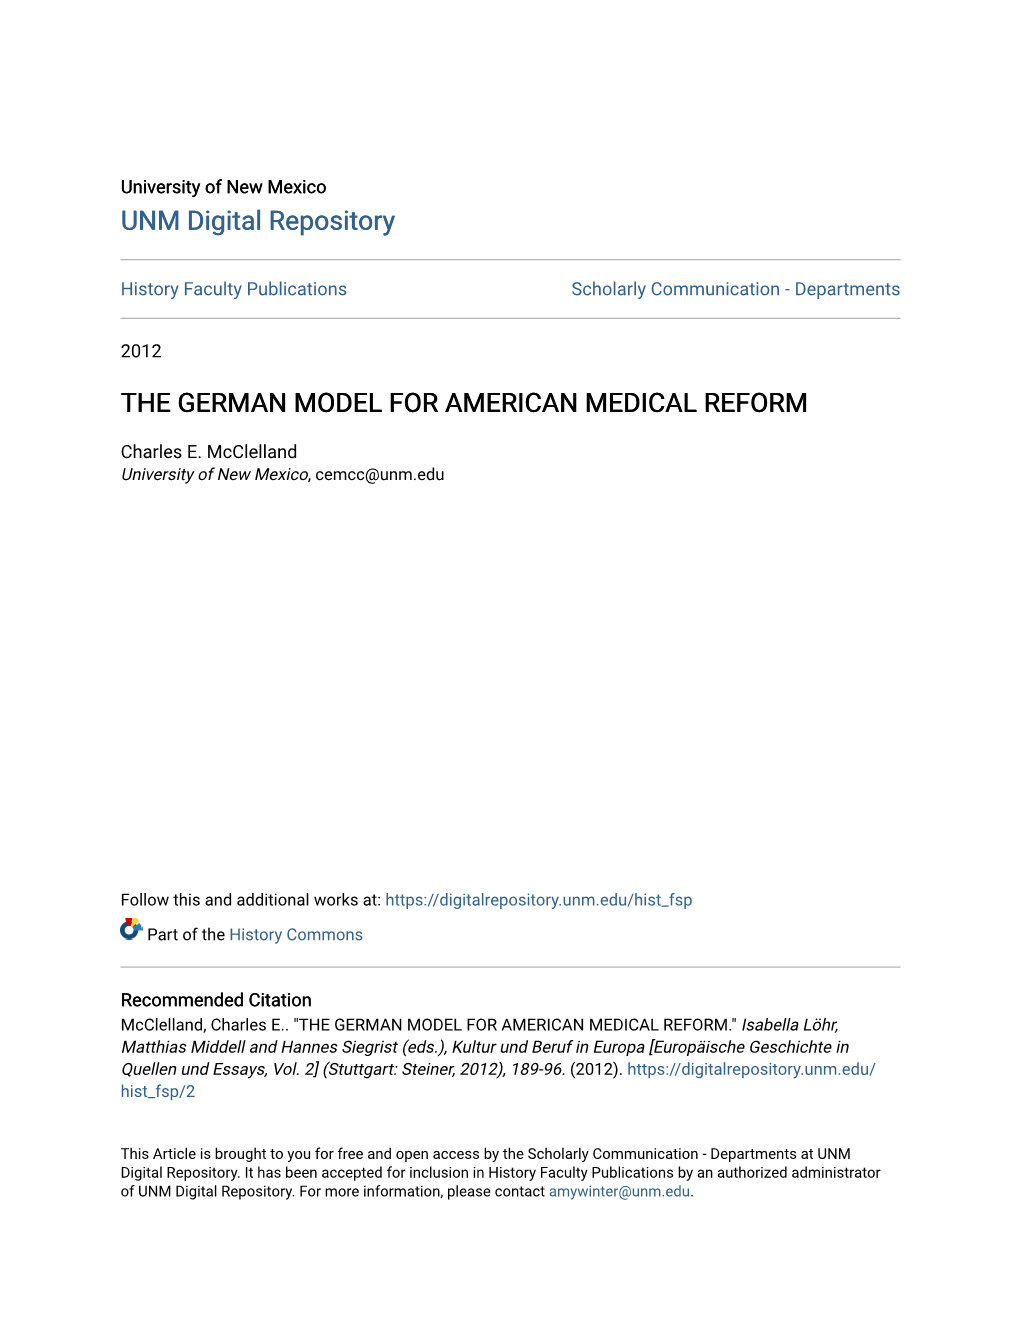 The German Model for American Medical Reform